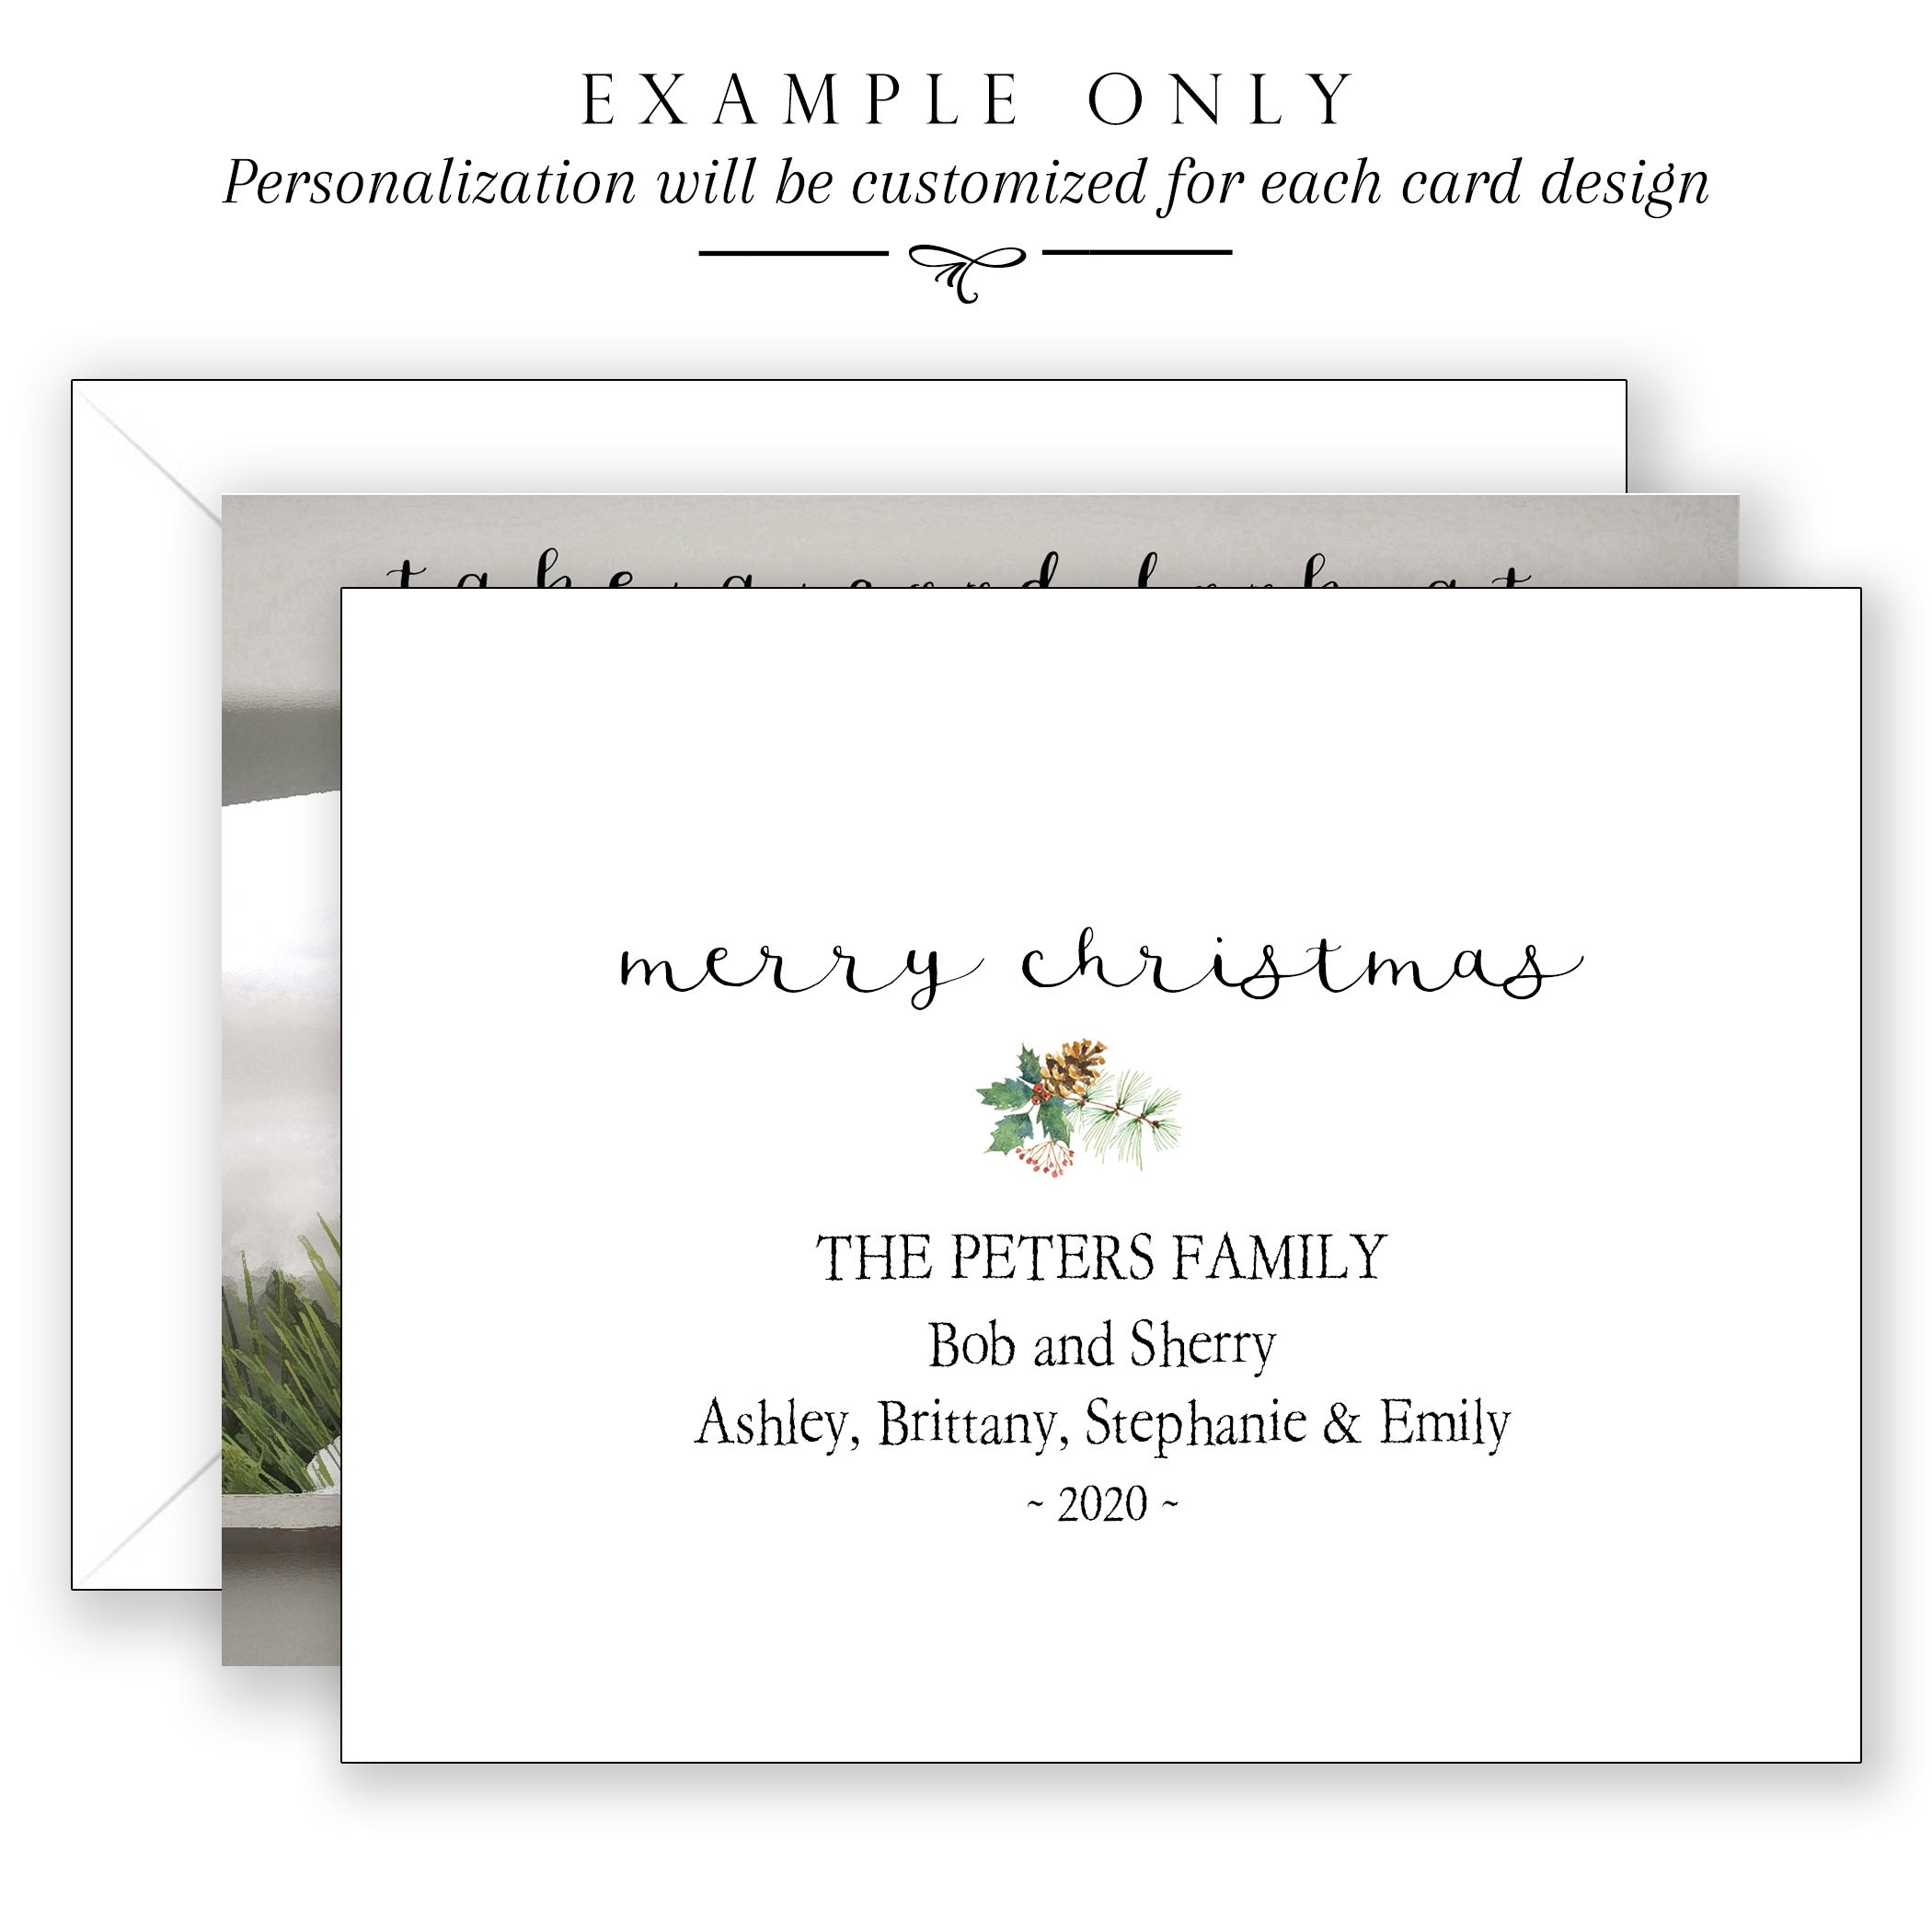 Personalization Fee for Boxed Christmas Cards